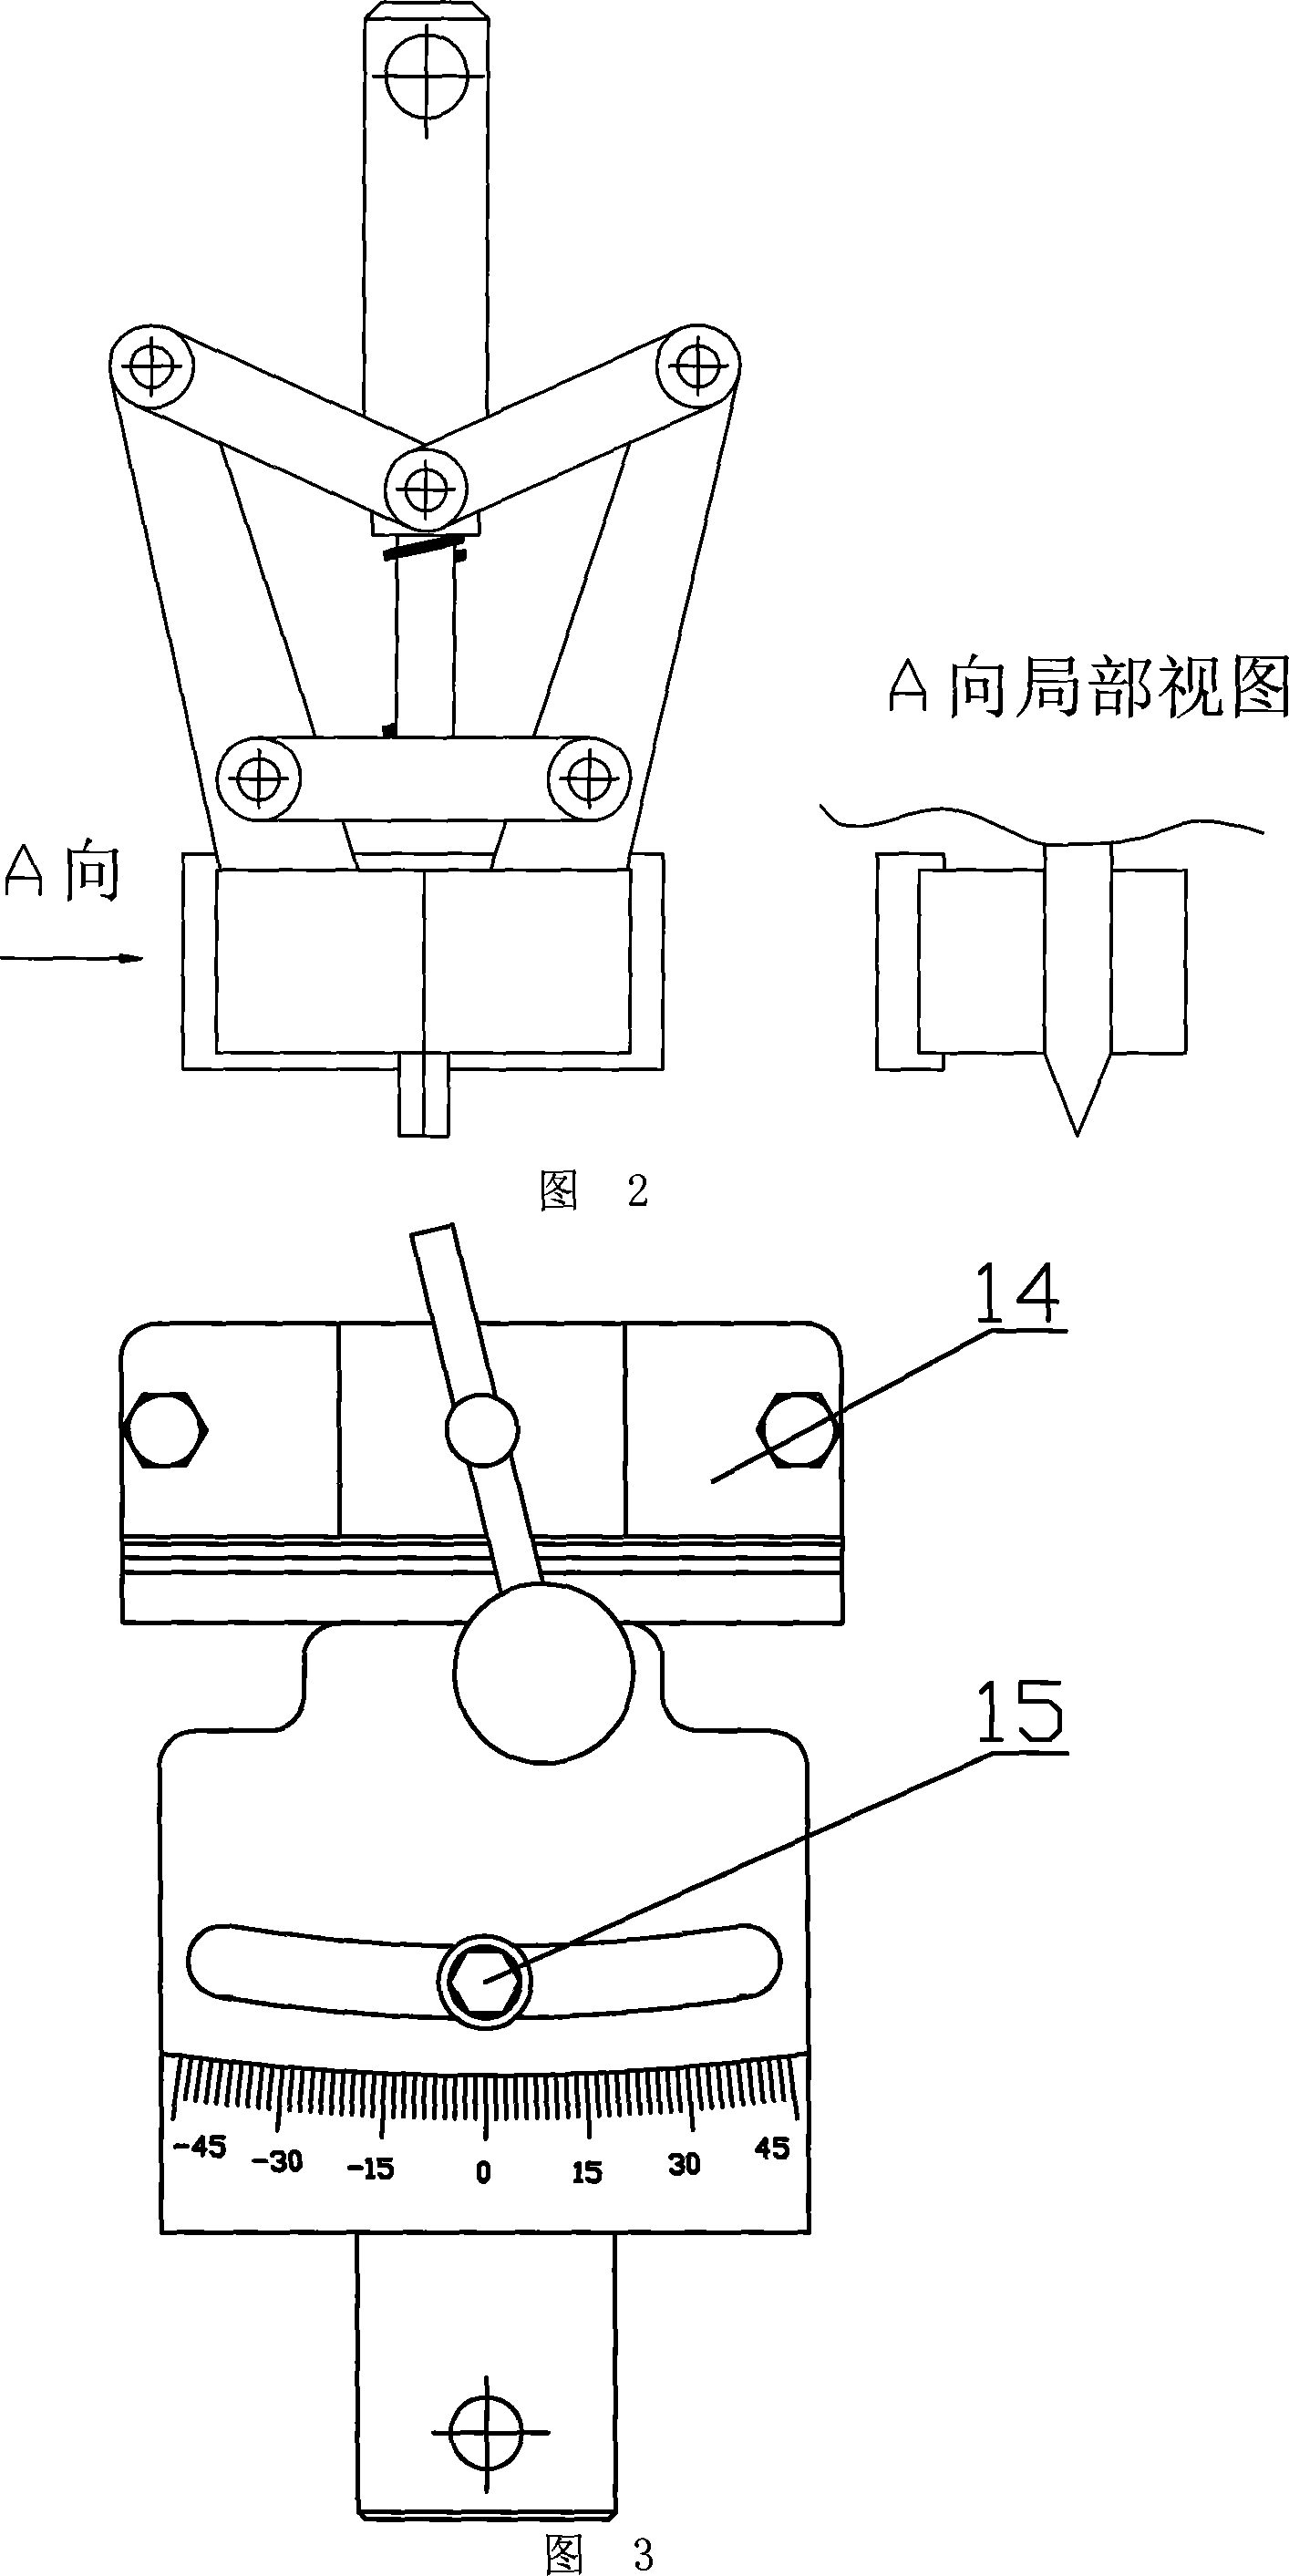 Agricultural material dynamic characteristic test apparatus and method